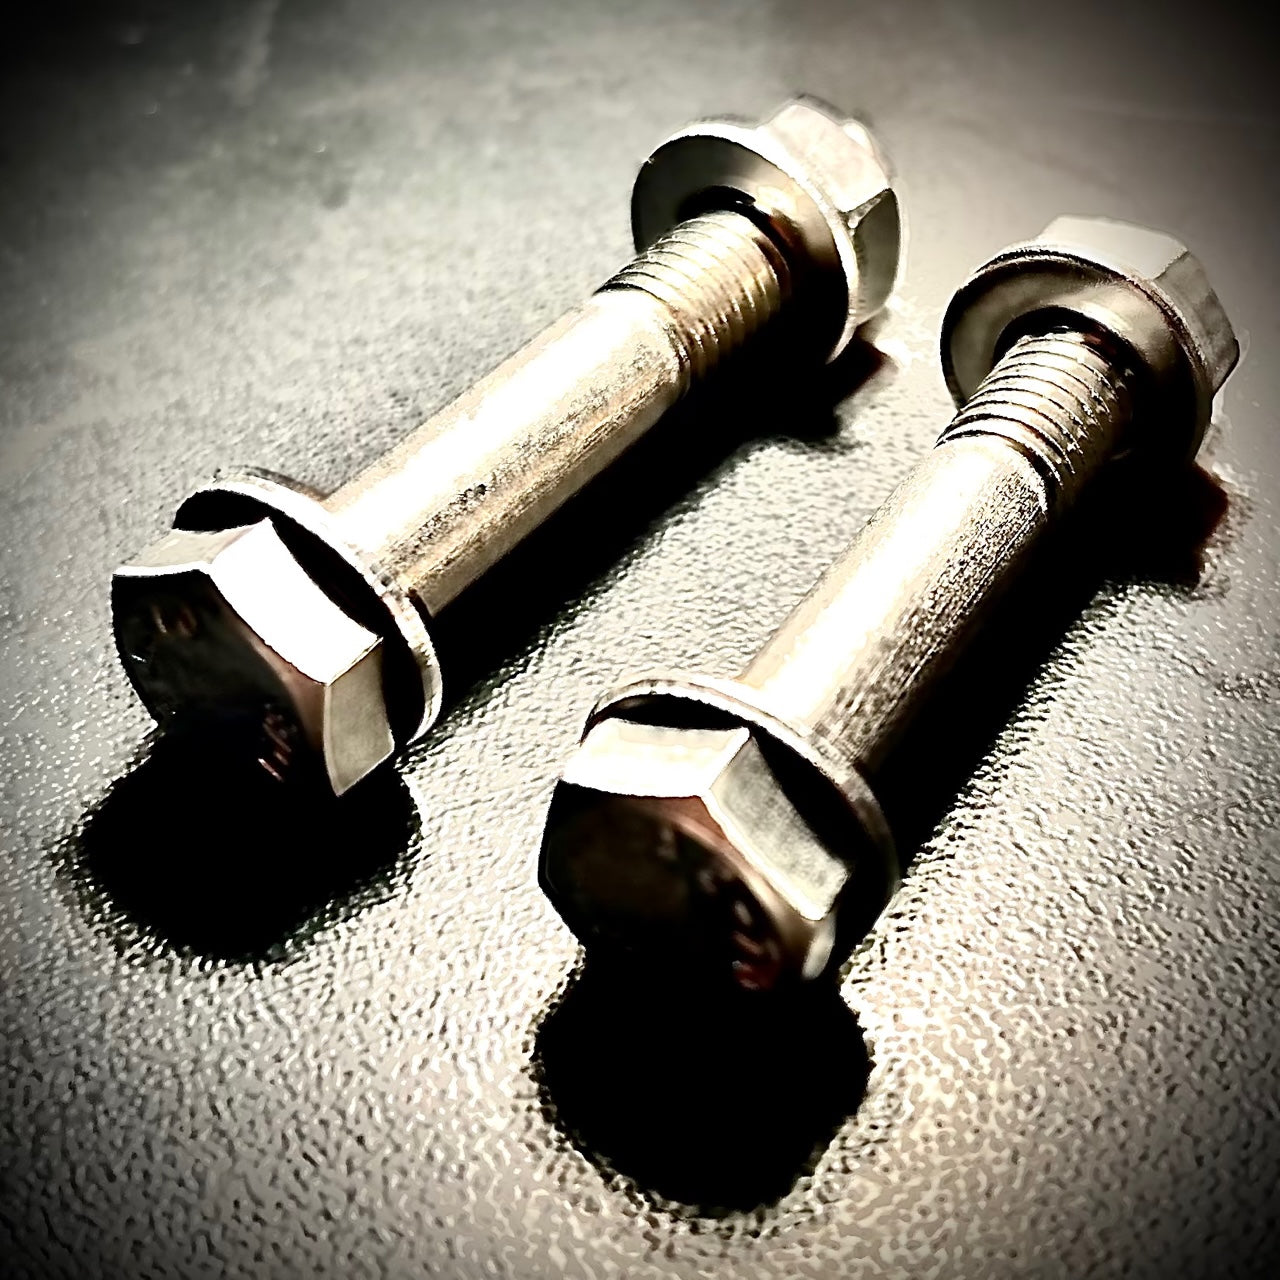 M12 x Under 110mm Hex Bolt plus Nut and Washers A2/ 304 Stainless Steel DIN 931 - Fixaball Ltd. Fixings and Fasteners UK